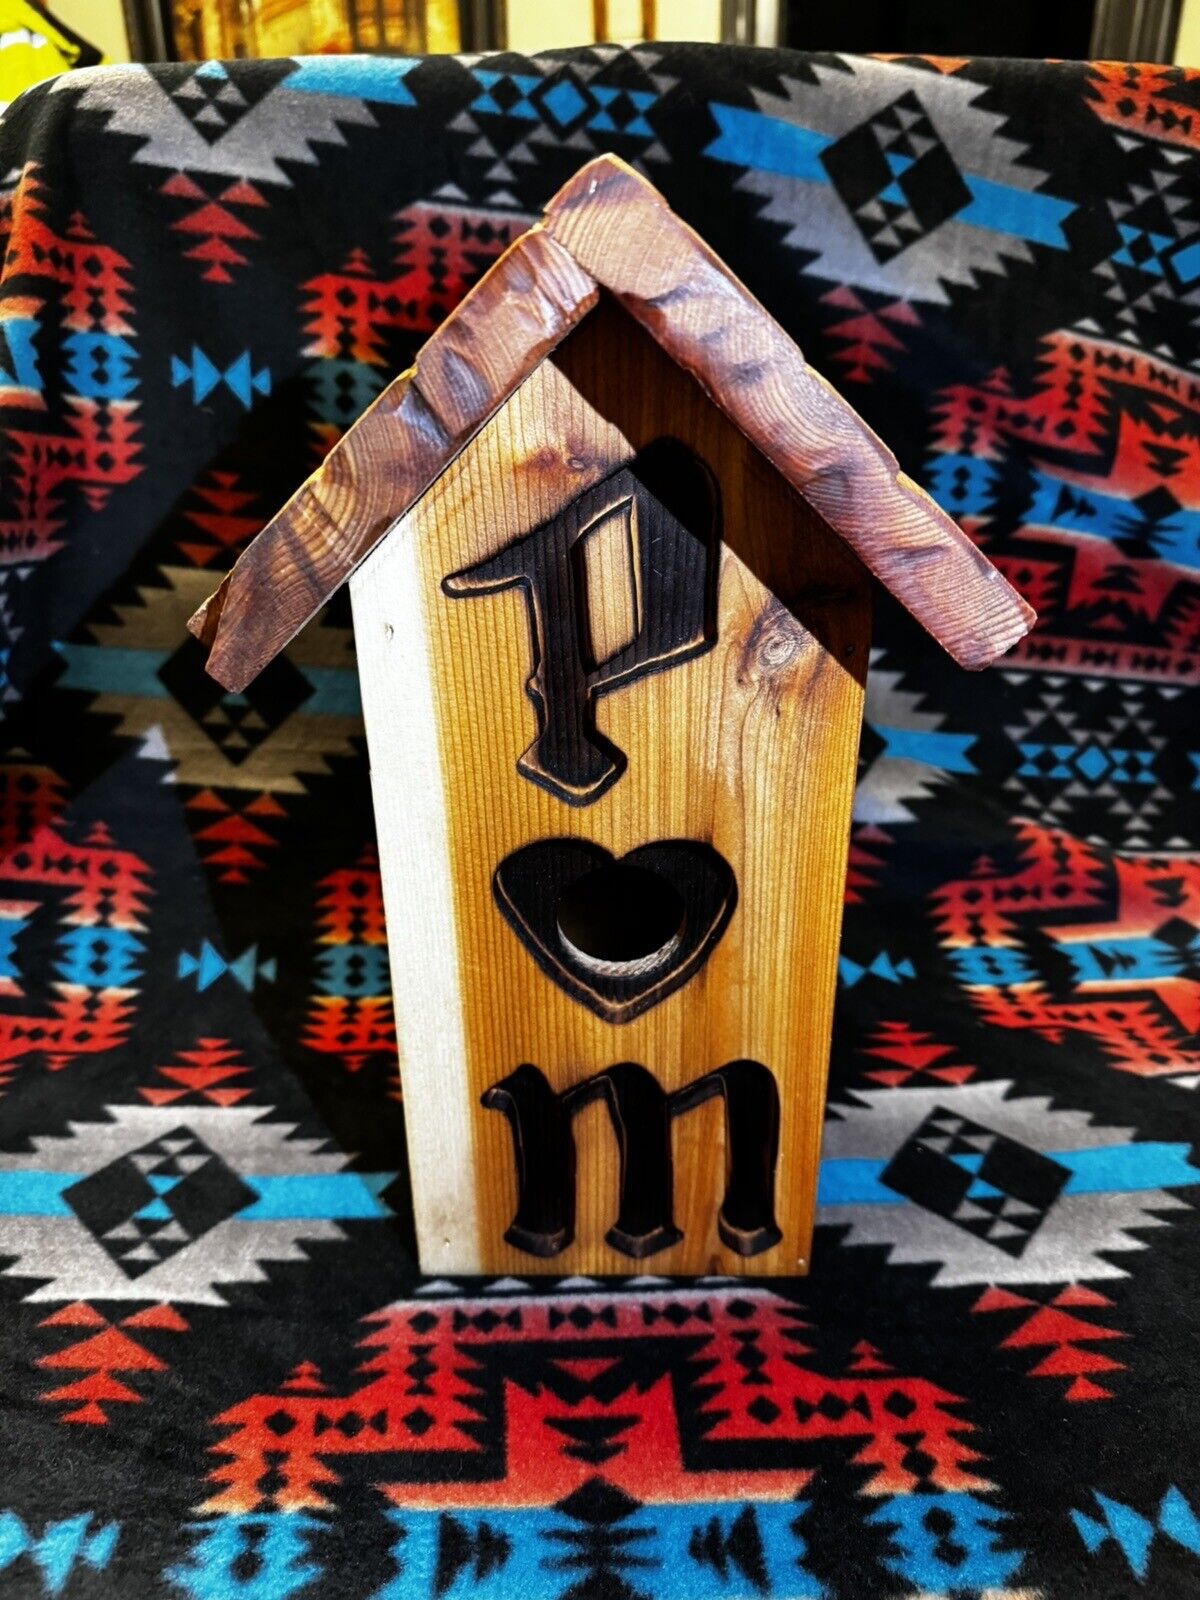 Bird house- show the love your your significant othermade with your initials